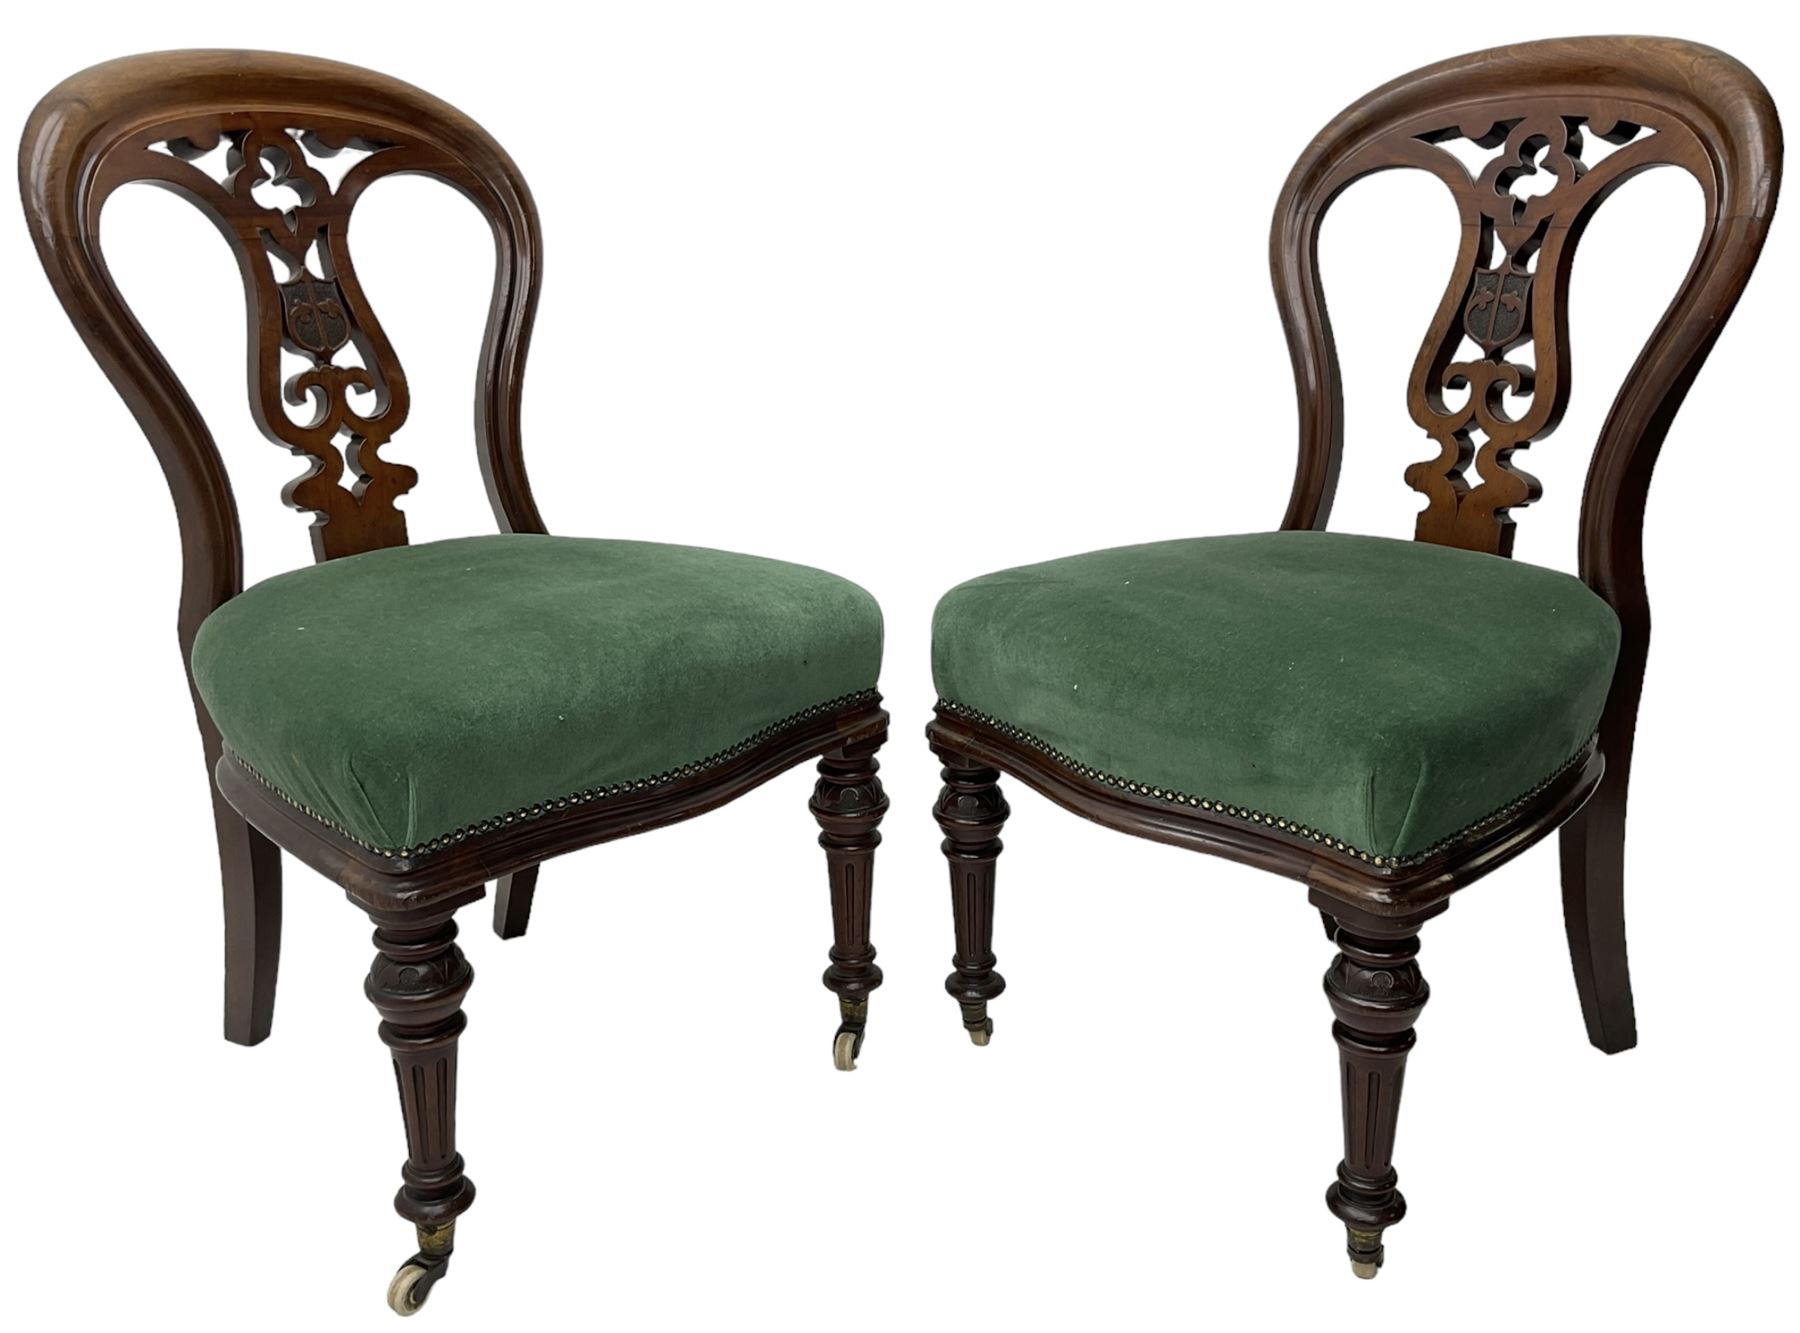 Pair of Victorian mahogany dining chairs